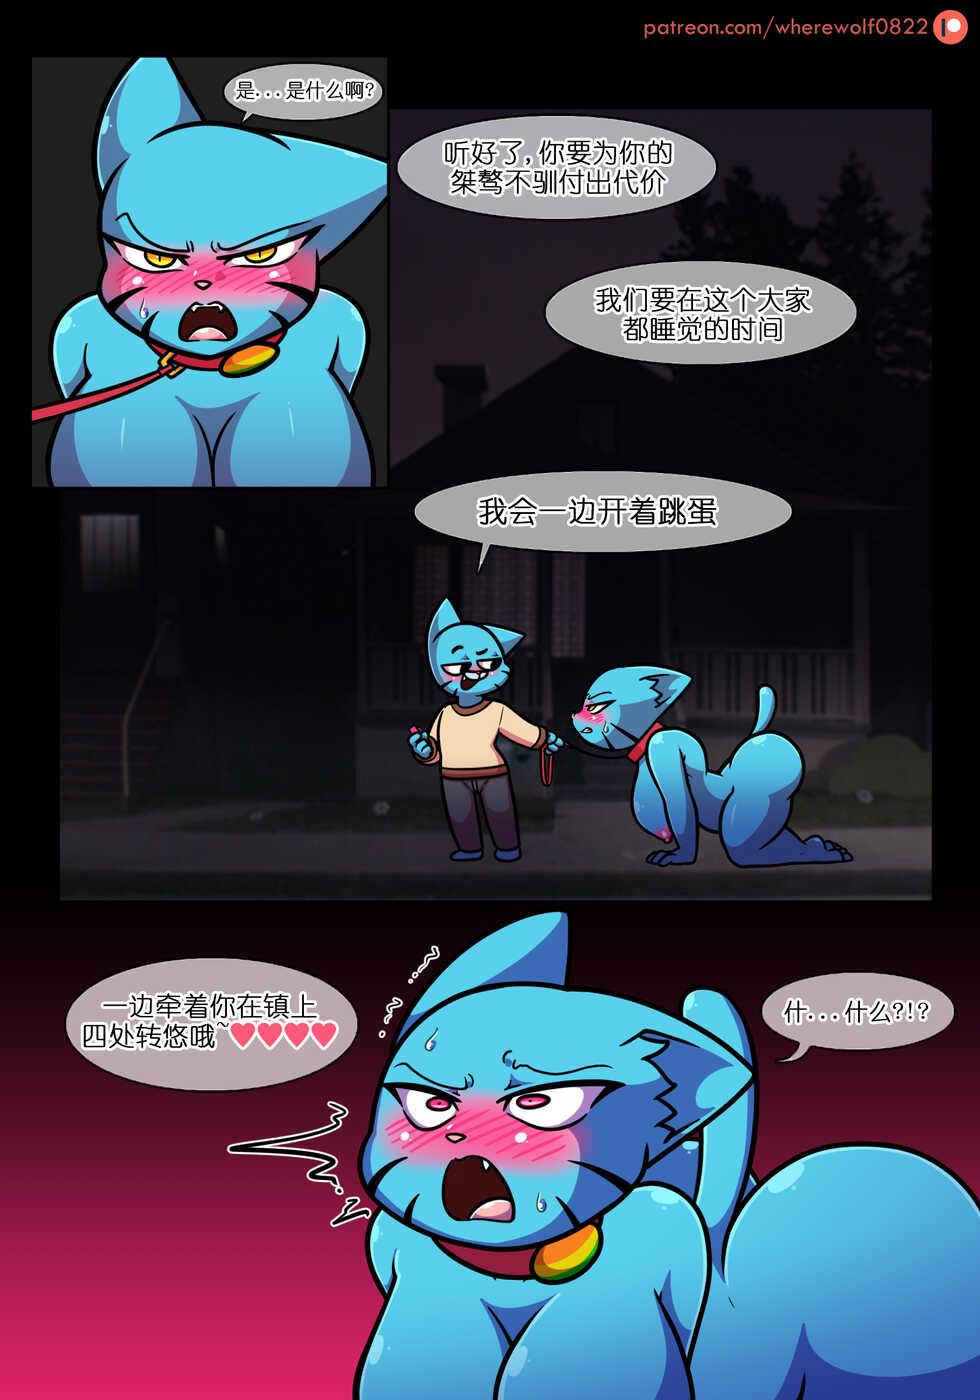 [Wherewolf] Lusty World of Nicole Ep. 5 - Controller pet [CN] - Page 9